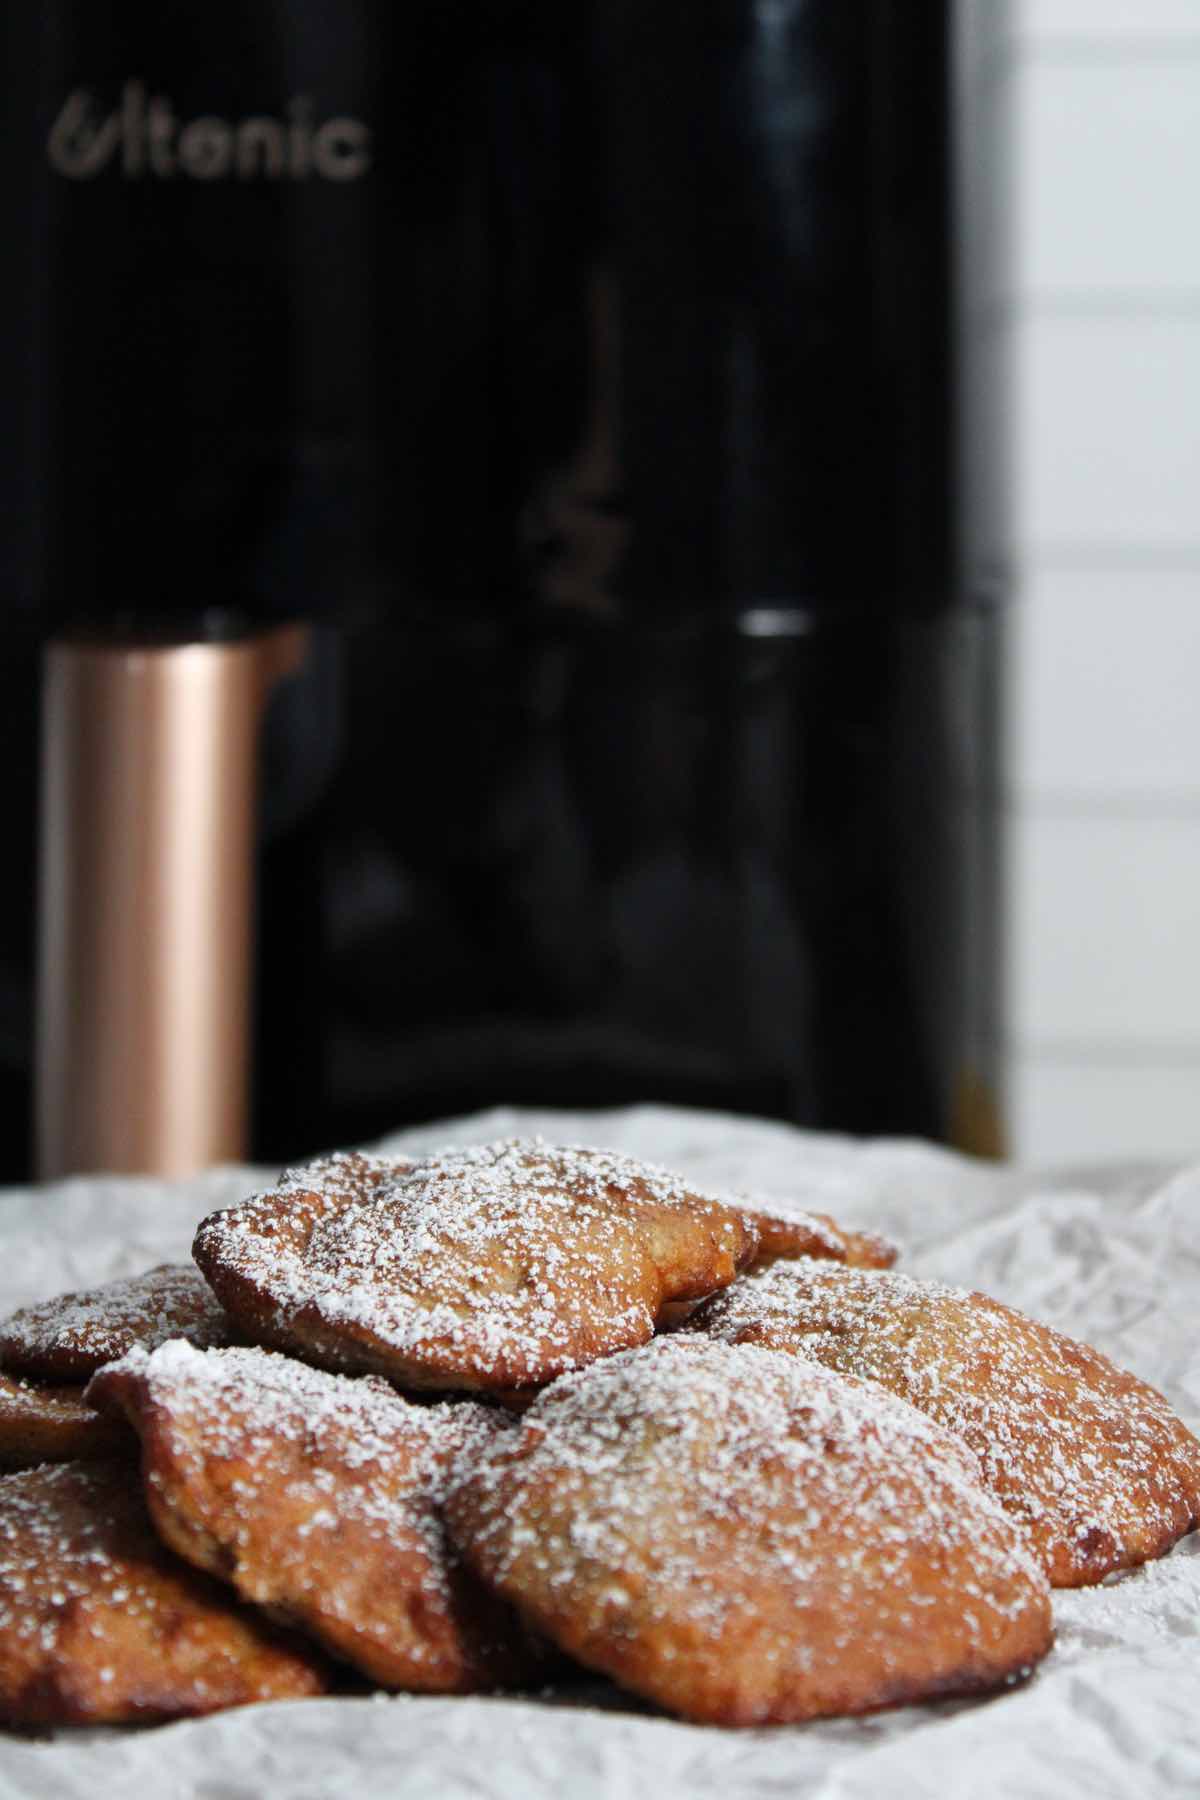 Air fried banana fritters make the perfect breakfast, snack or even dessert.